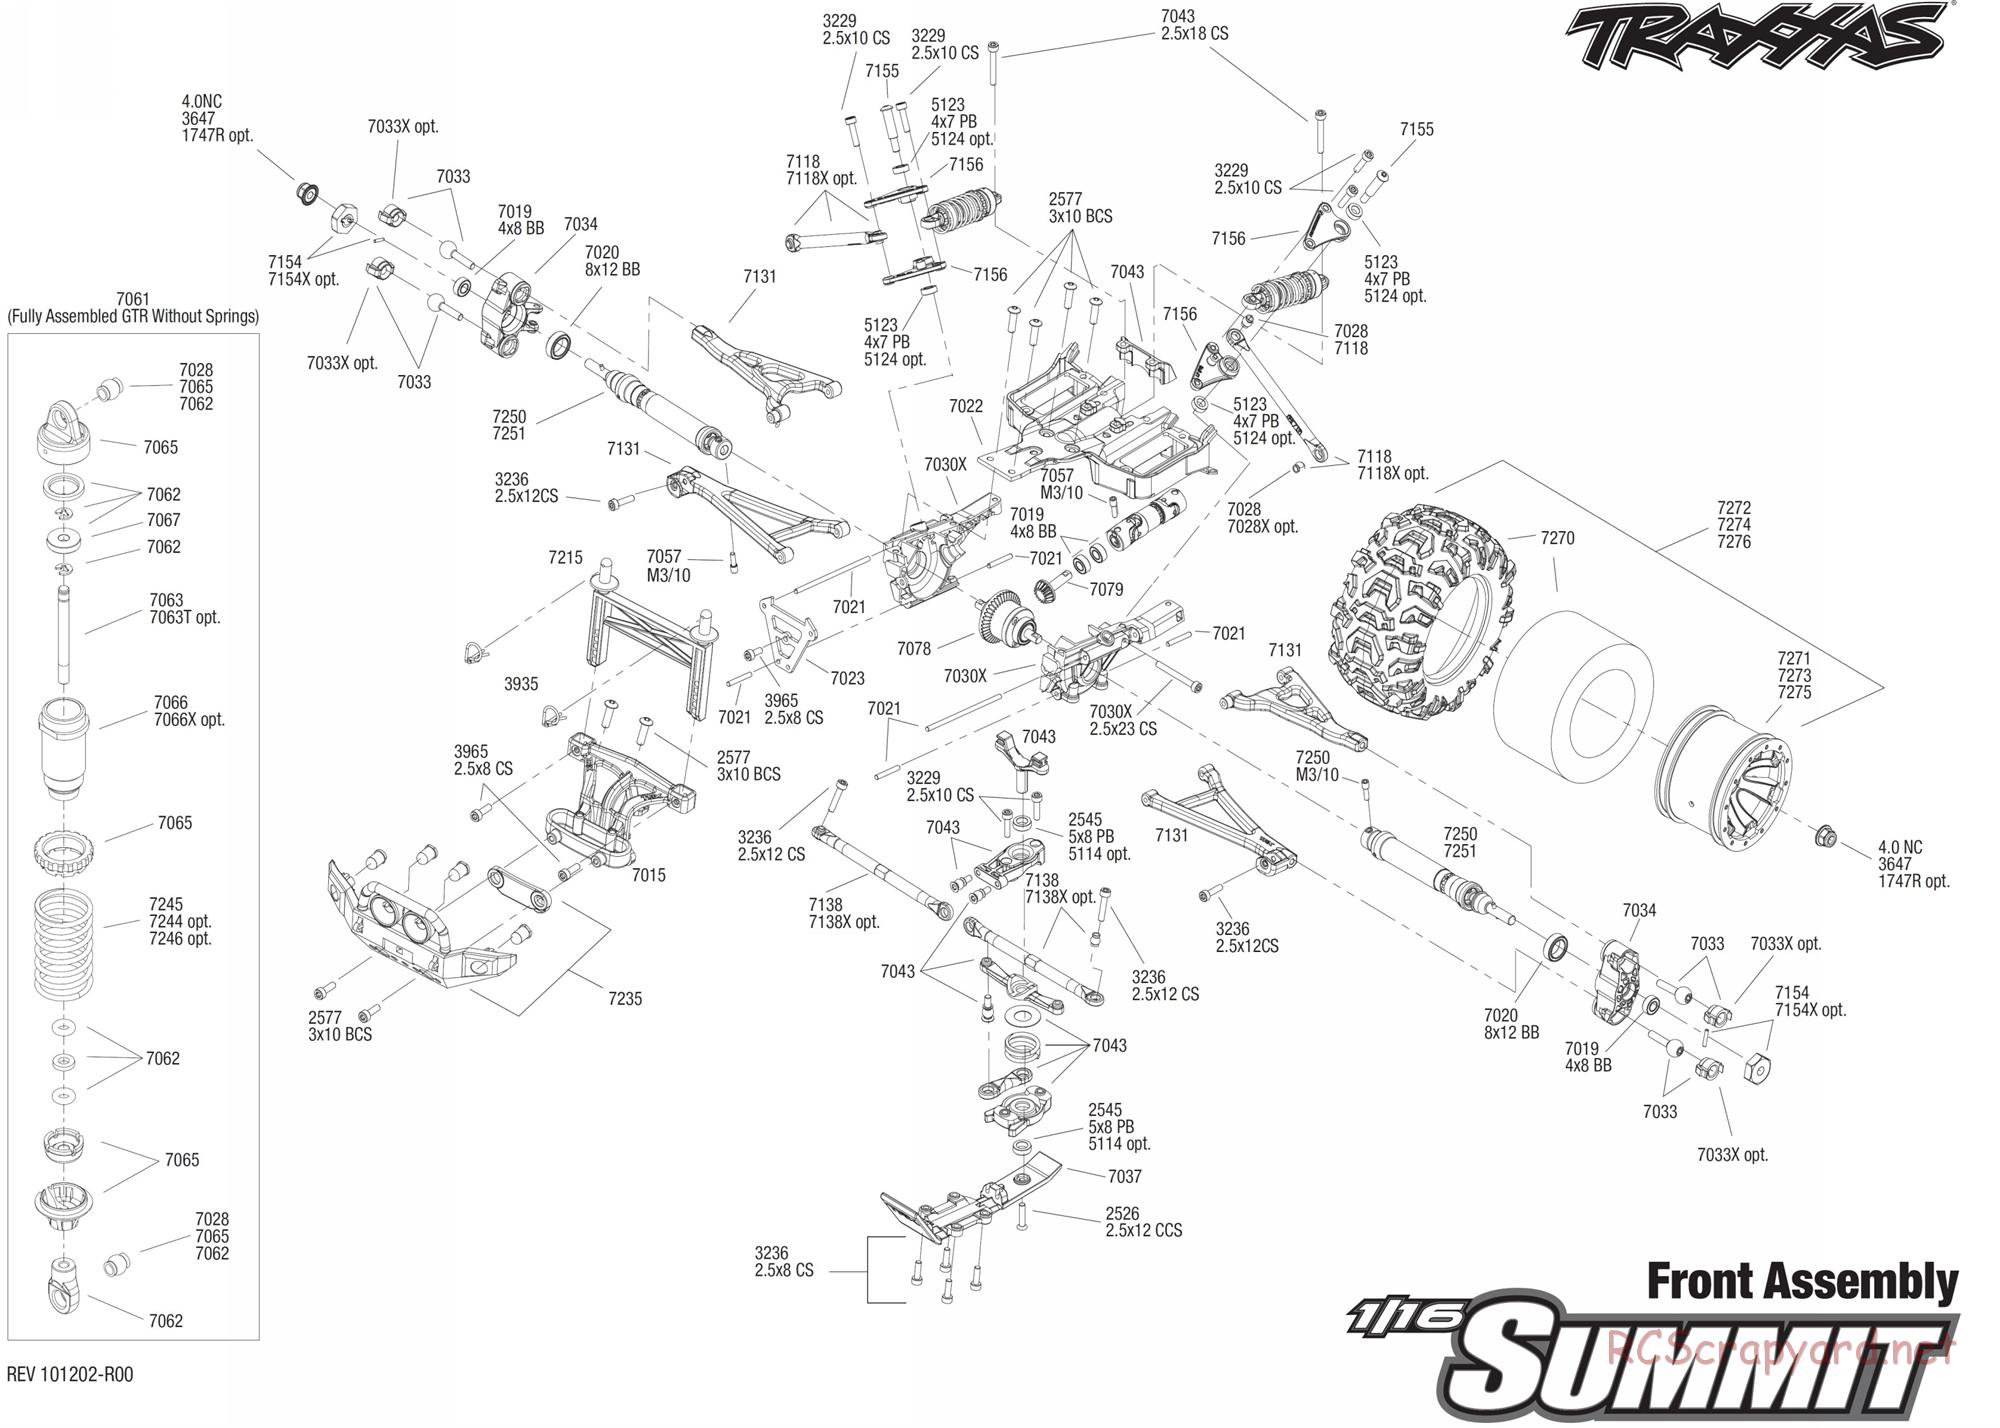 Traxxas - 1/16 Summit (2011) - Exploded Views - Page 3